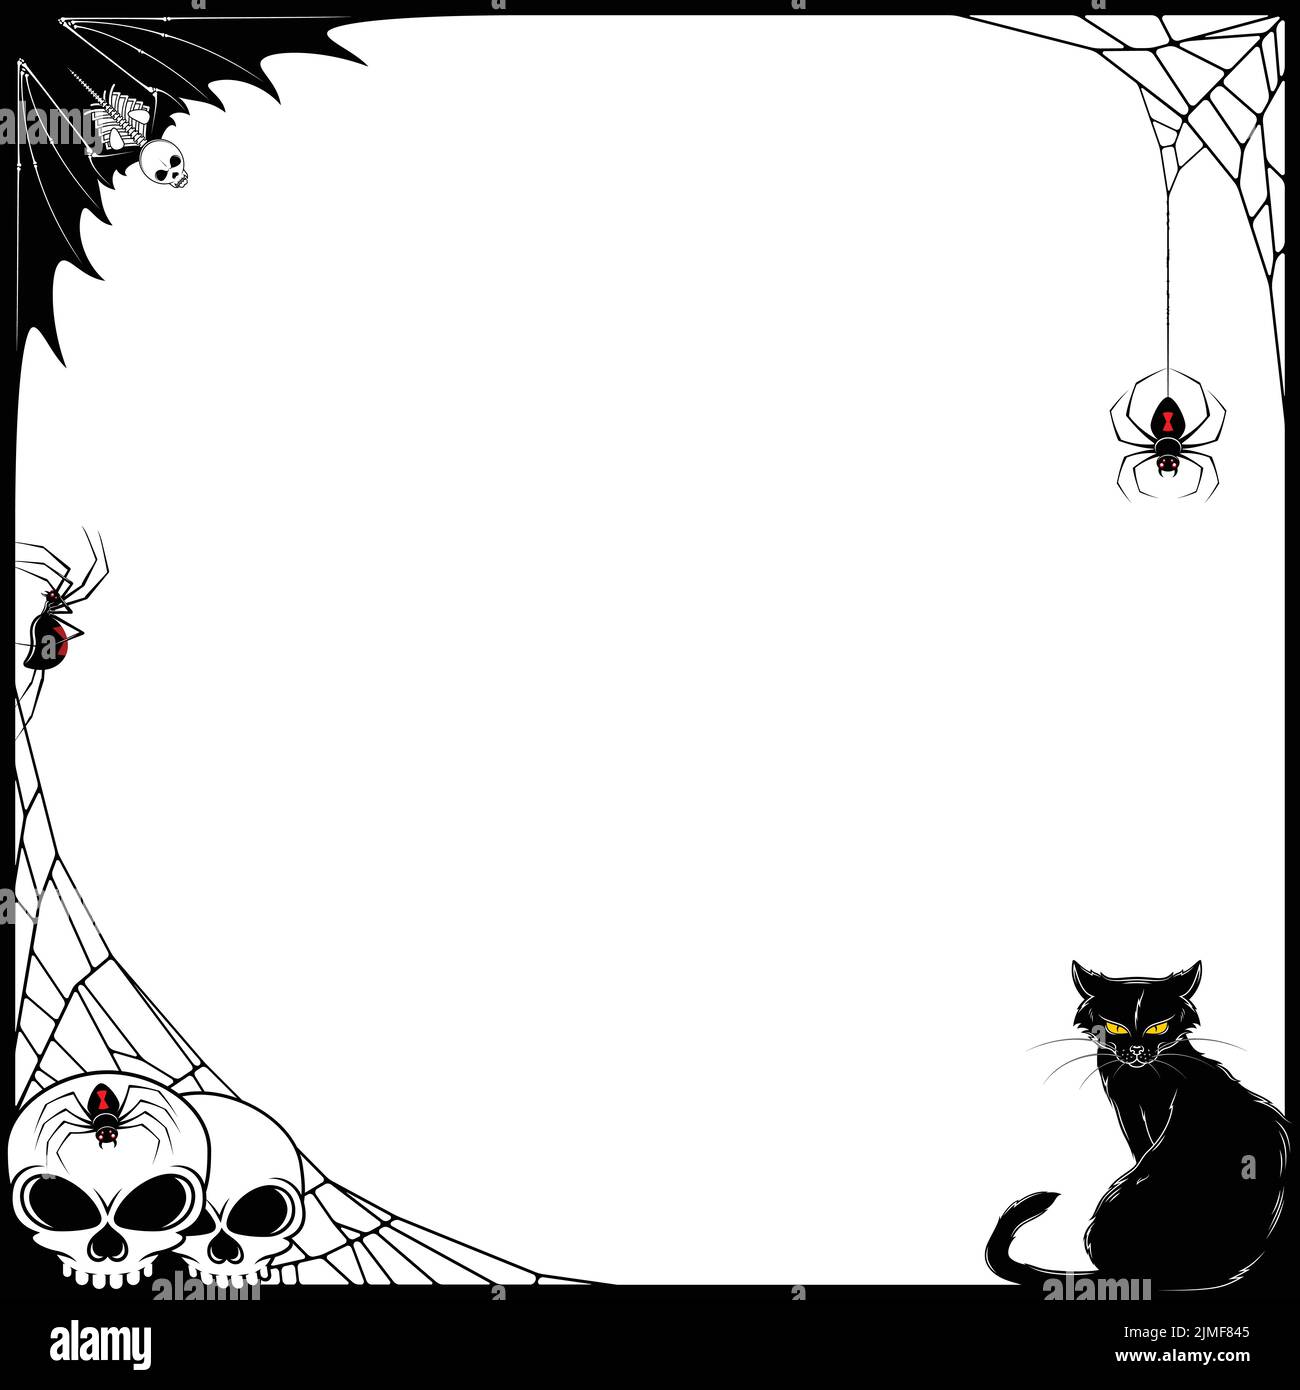 Frame vector design for with characteristic elements of Halloween with bats, spiders and skulls Stock Vector